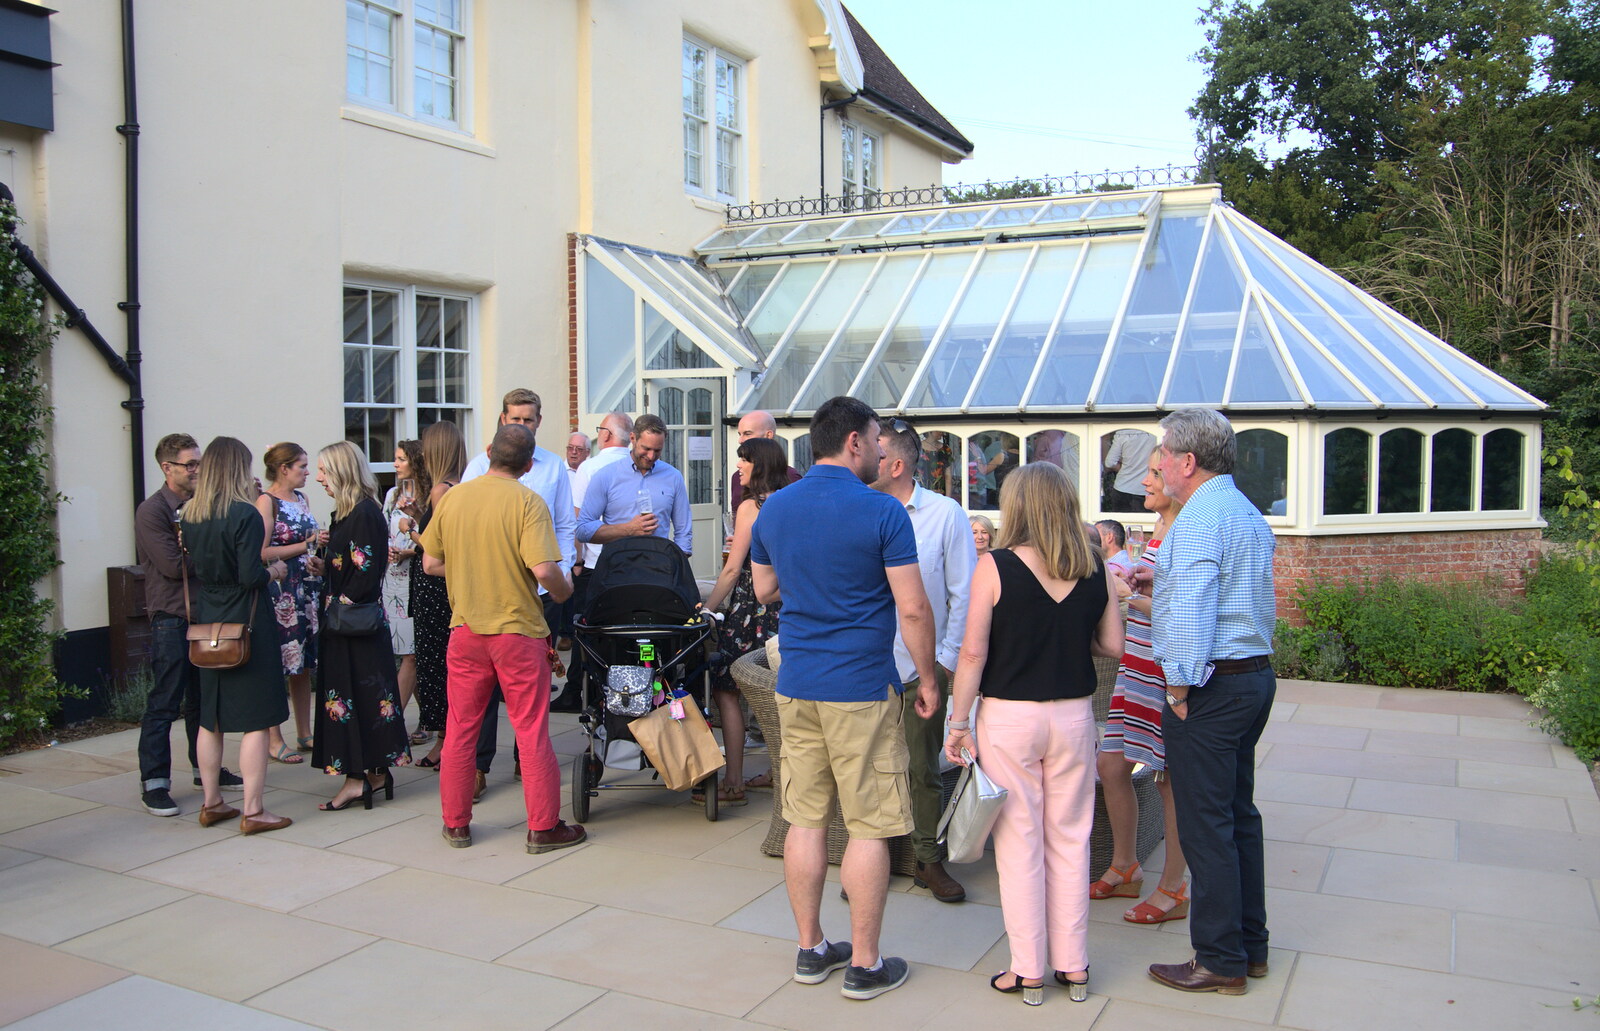 Guests spill out onto the patio from An Oaksmere Party, Brome, Suffolk - 14th July 2018